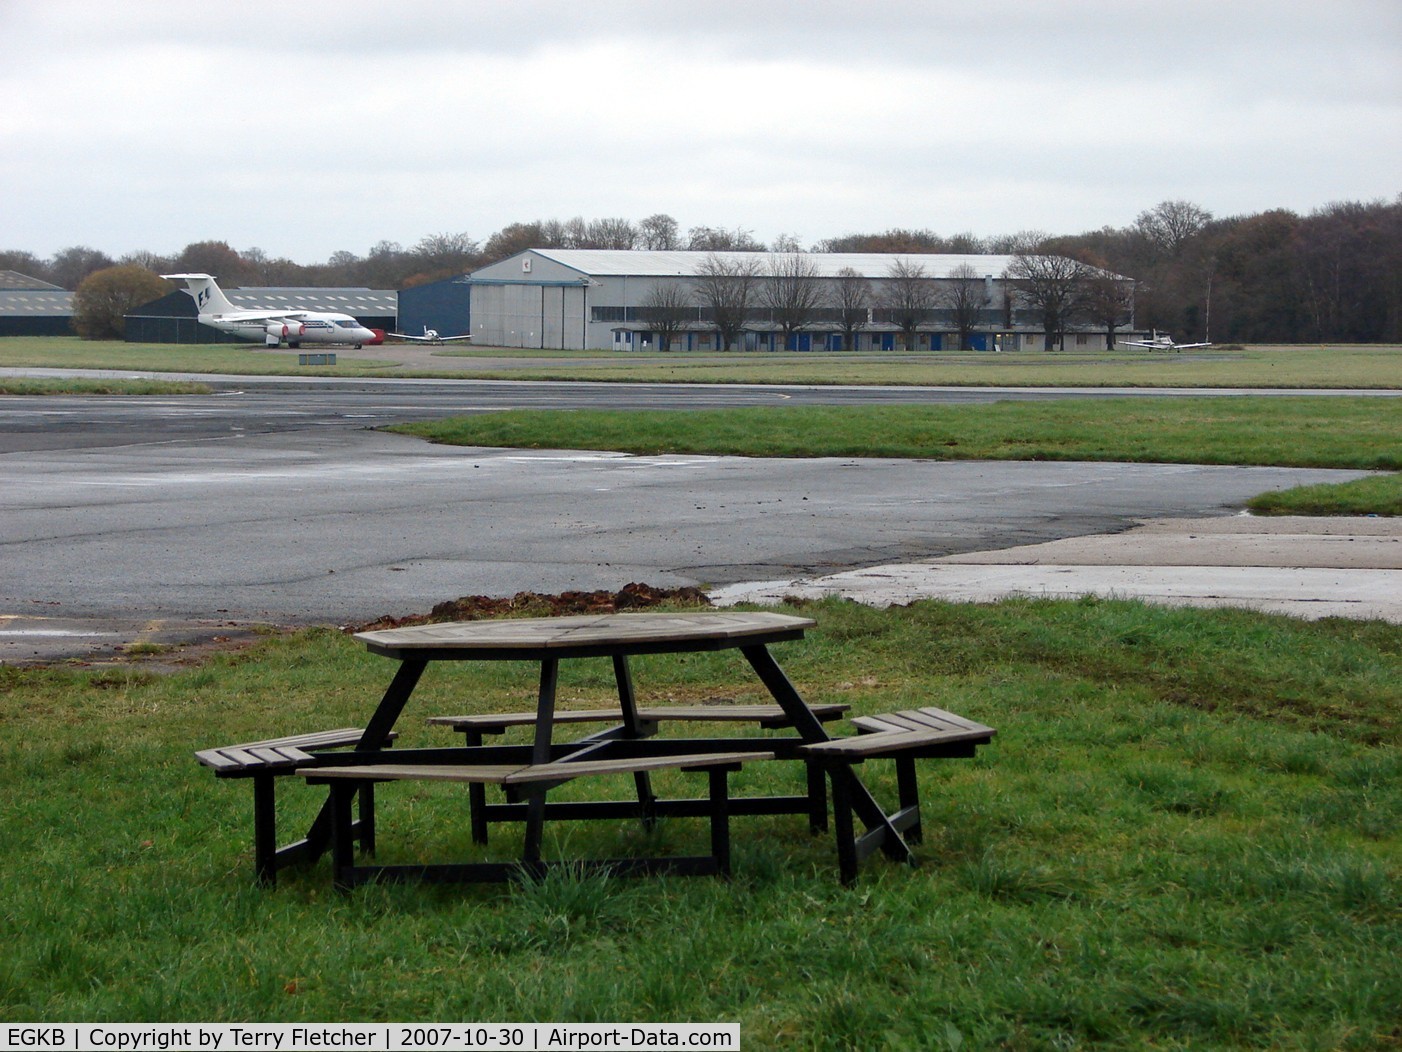 London Biggin Hill Airport, London, England United Kingdom (EGKB) - Opposite side to the Executive Terminal